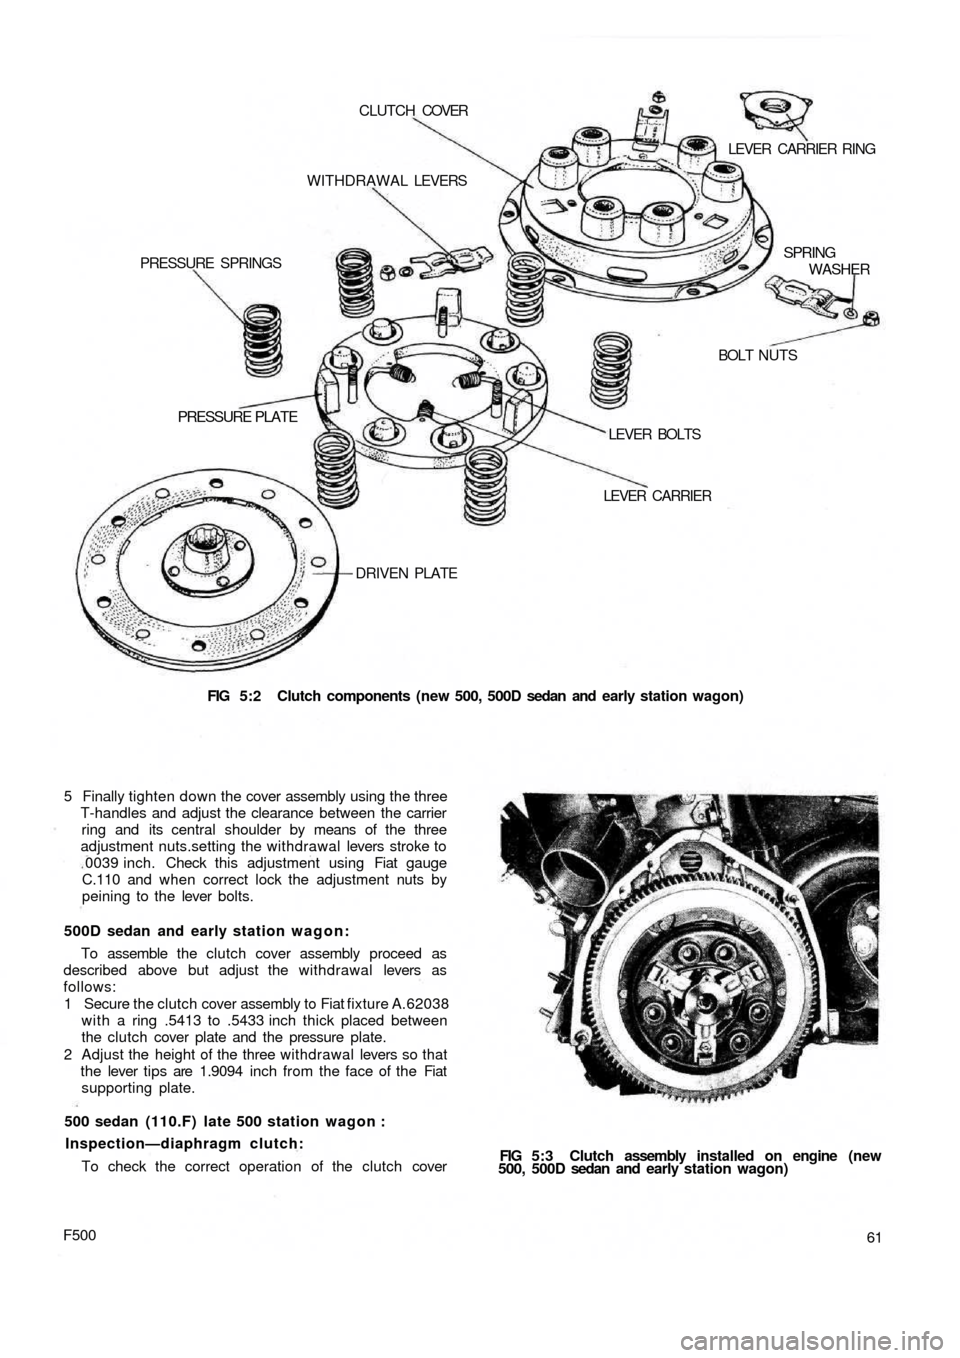 FIAT 500 1966 1.G Workshop Manual FIG 5:2  Clutch components (new 500, 500D sedan  and  early station wagon) DRIVEN PLATE
PRESSURE  PLATE
LEVER  CARRIER LEVER  BOLTSBOLT NUTS PRESSURE  SPRINGSWITHDRAWAL LEVERS CLUTCH COVER
LEVER  CARR